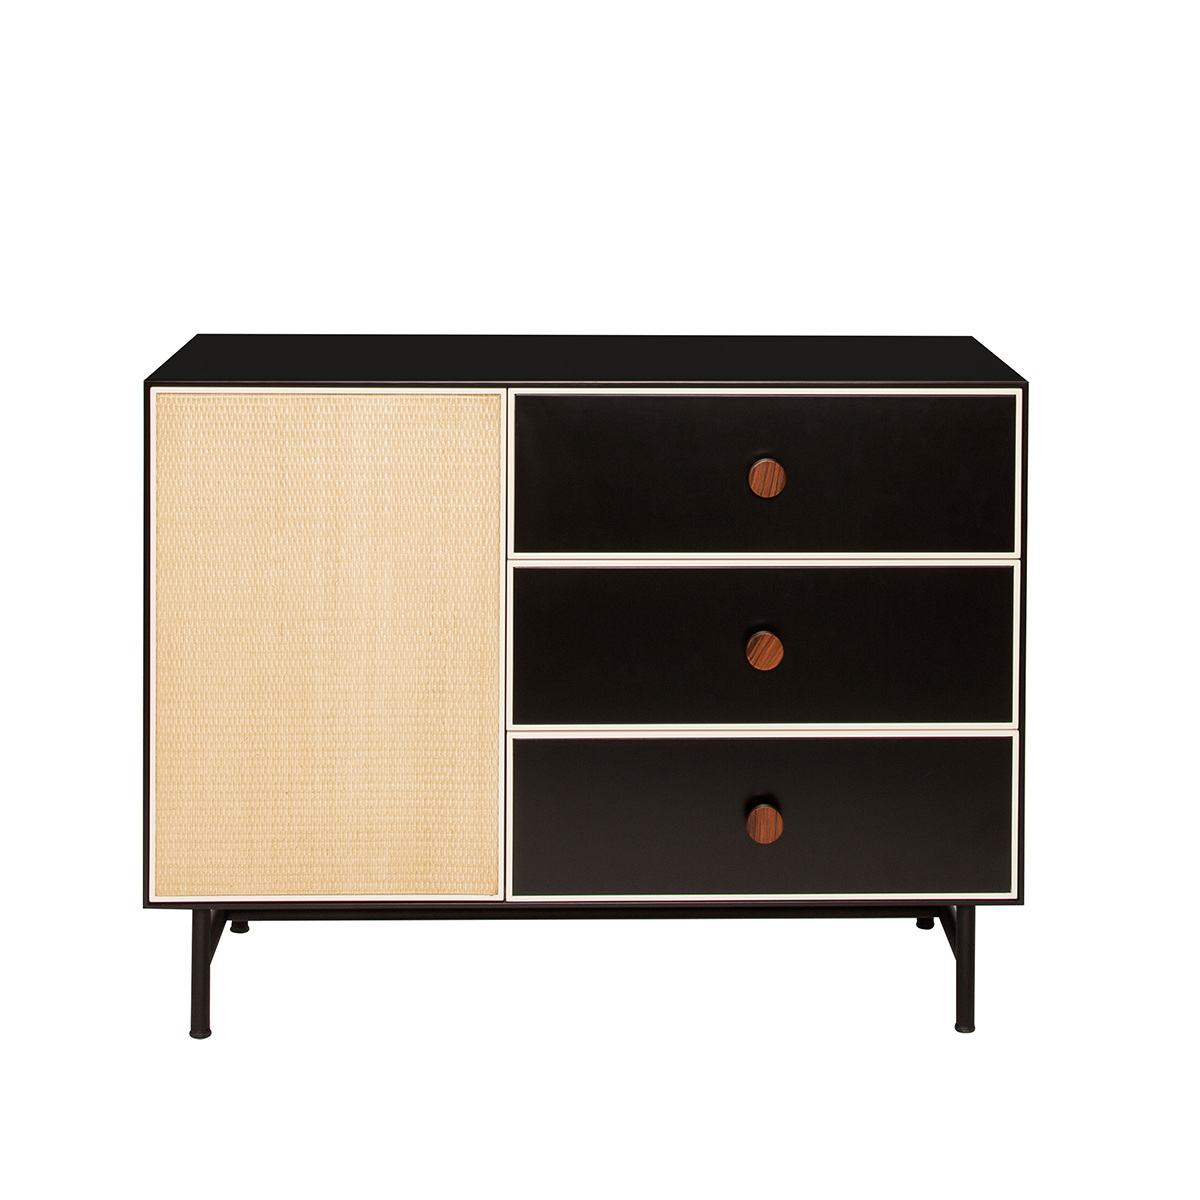 Chest of Drawers Essence, Black / Ivory - L100 x W45 x H75 cm - Lacquered wood - image 1